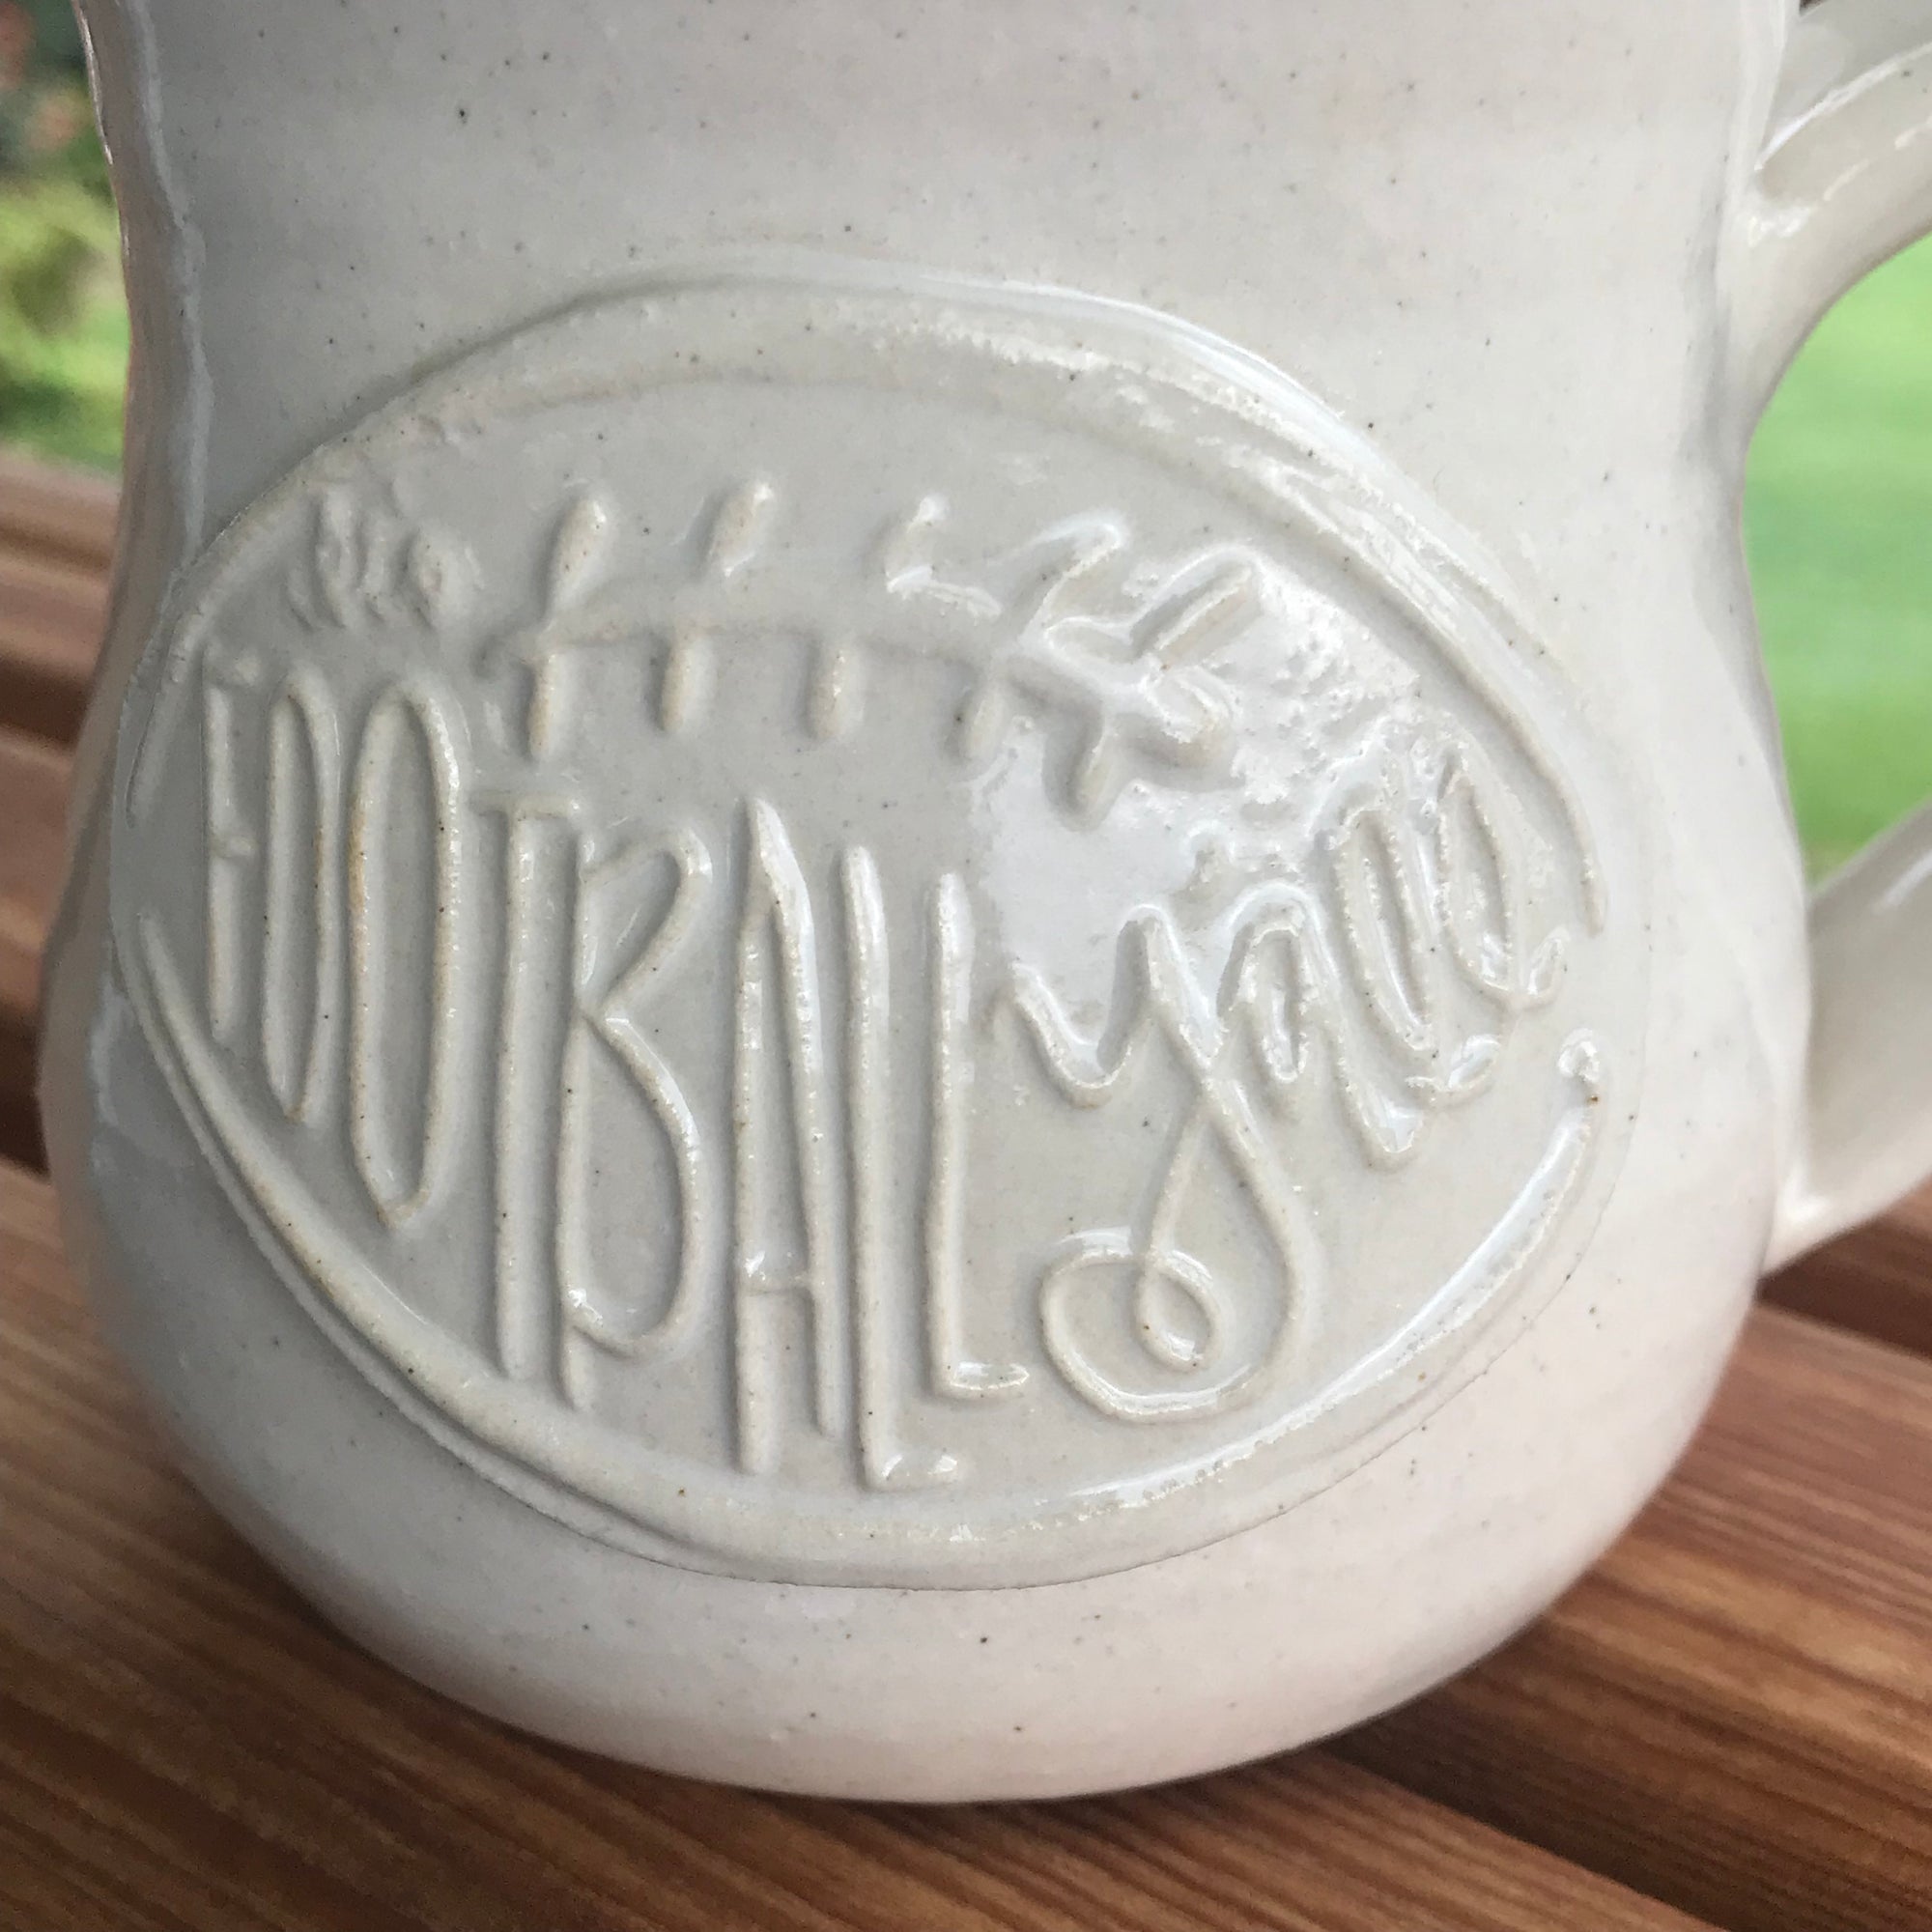 "It's Football Y'all" Handcrafted Pottery Mug